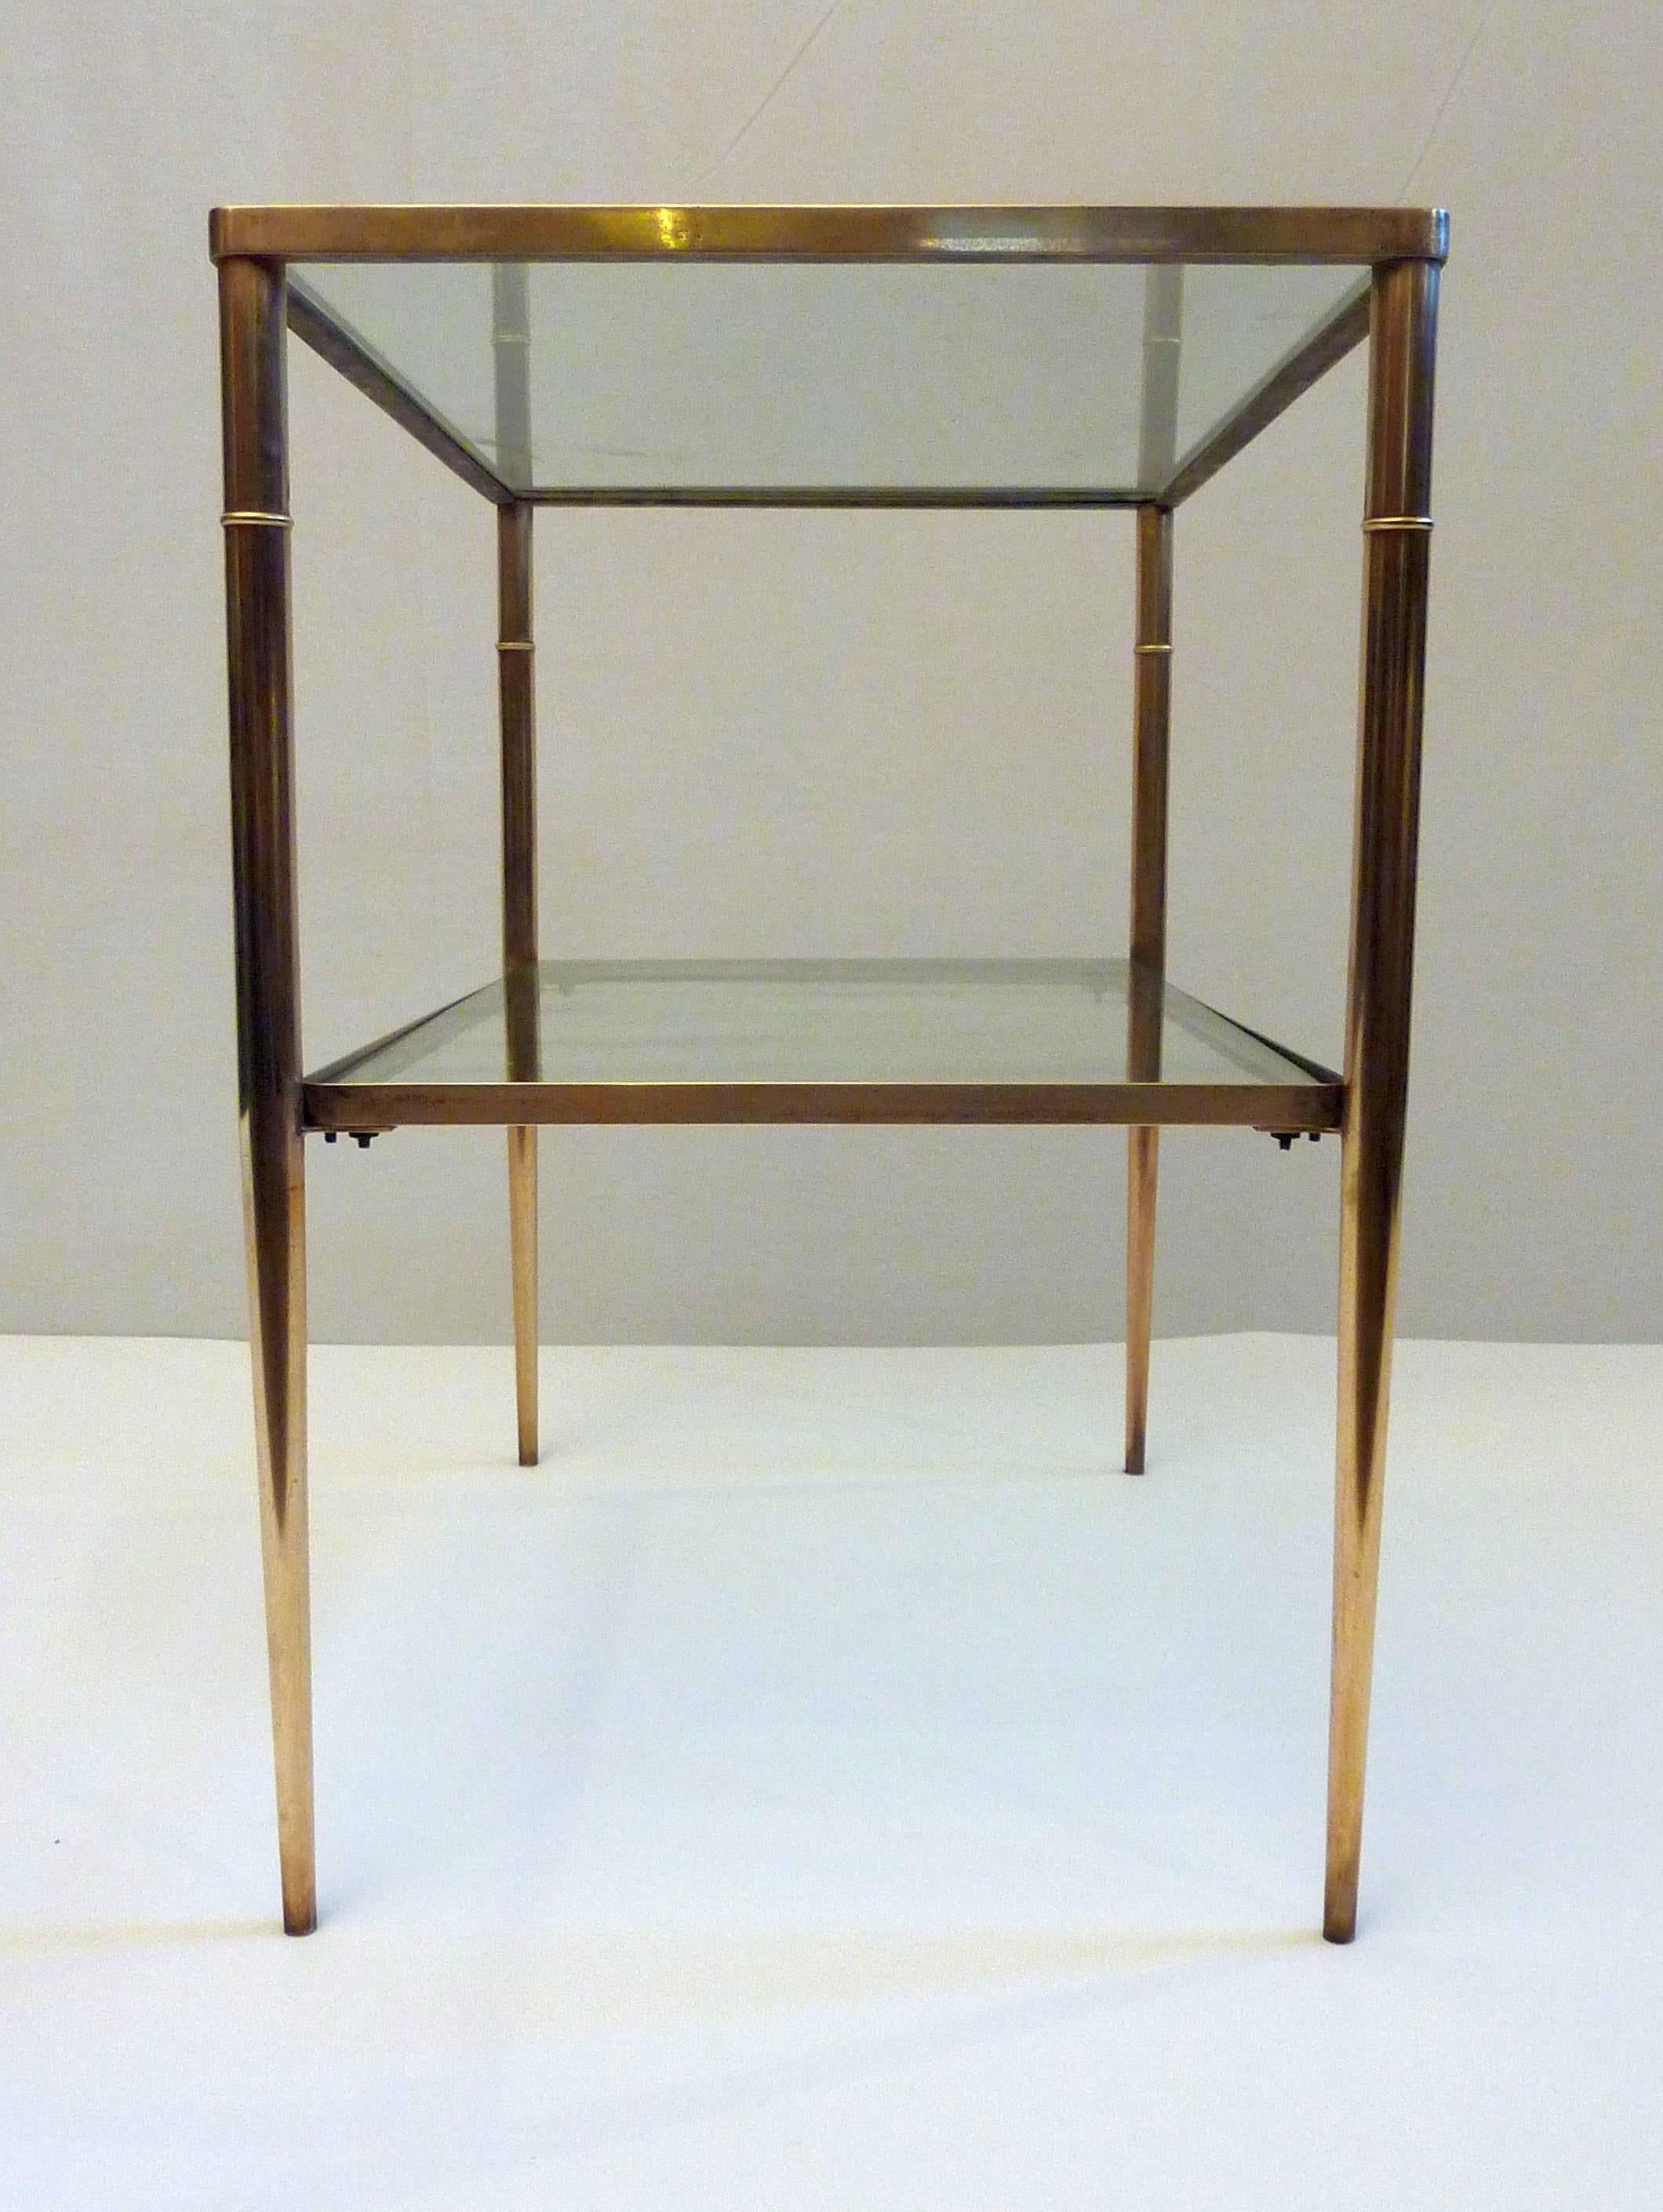 Elegant side table with two levels. It has a brass frame with clear glass shelves.